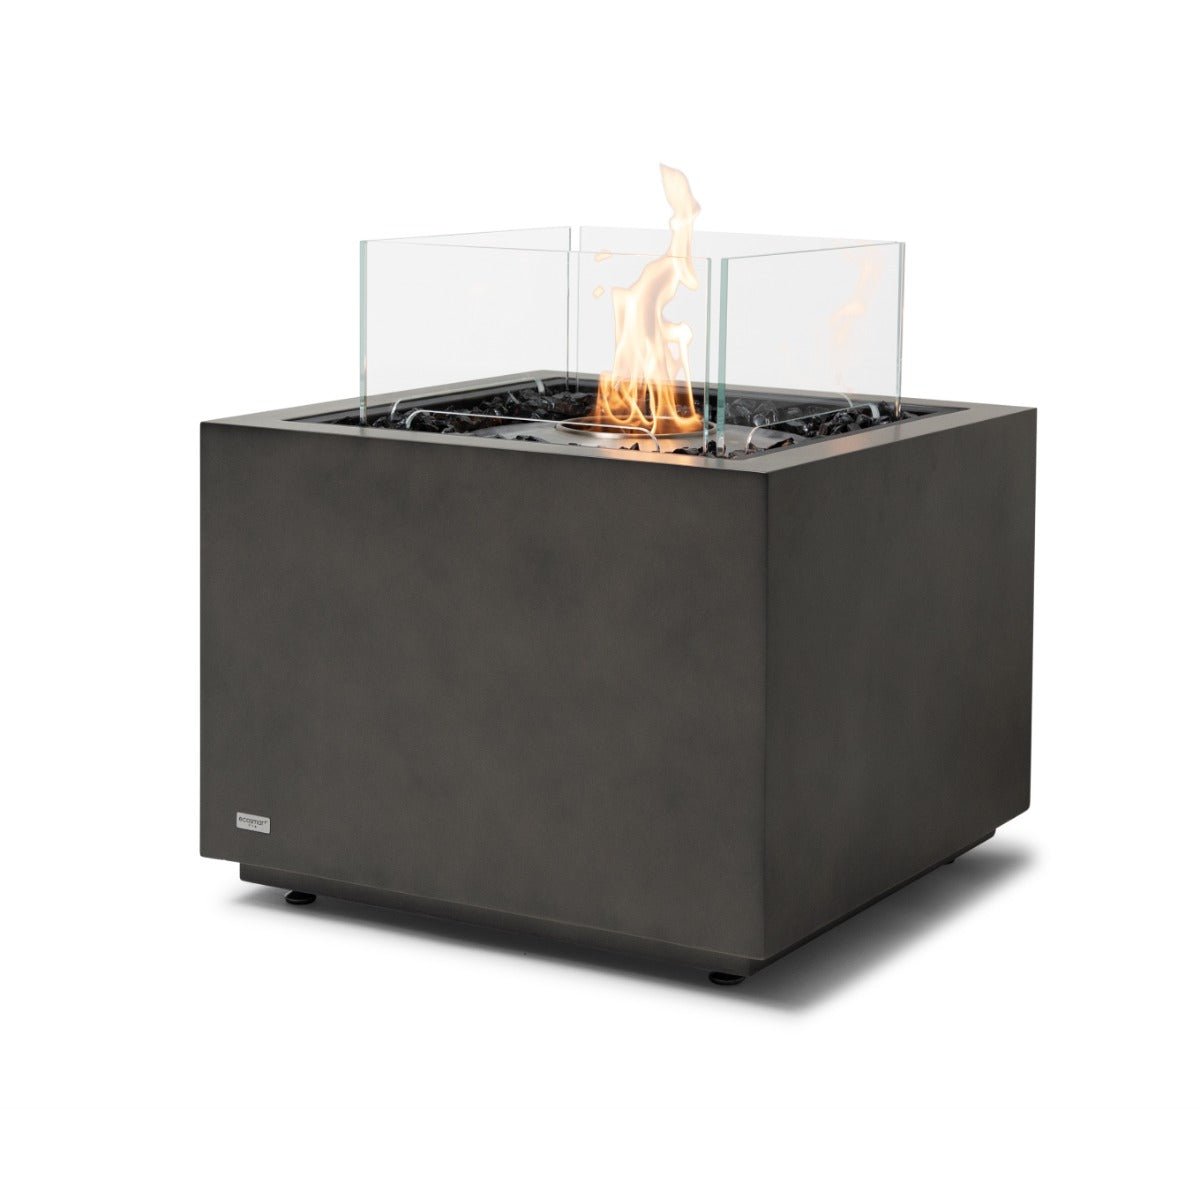 EcoSmart Sidecar 24 Fire Pit Table - Natural - Outdoorium